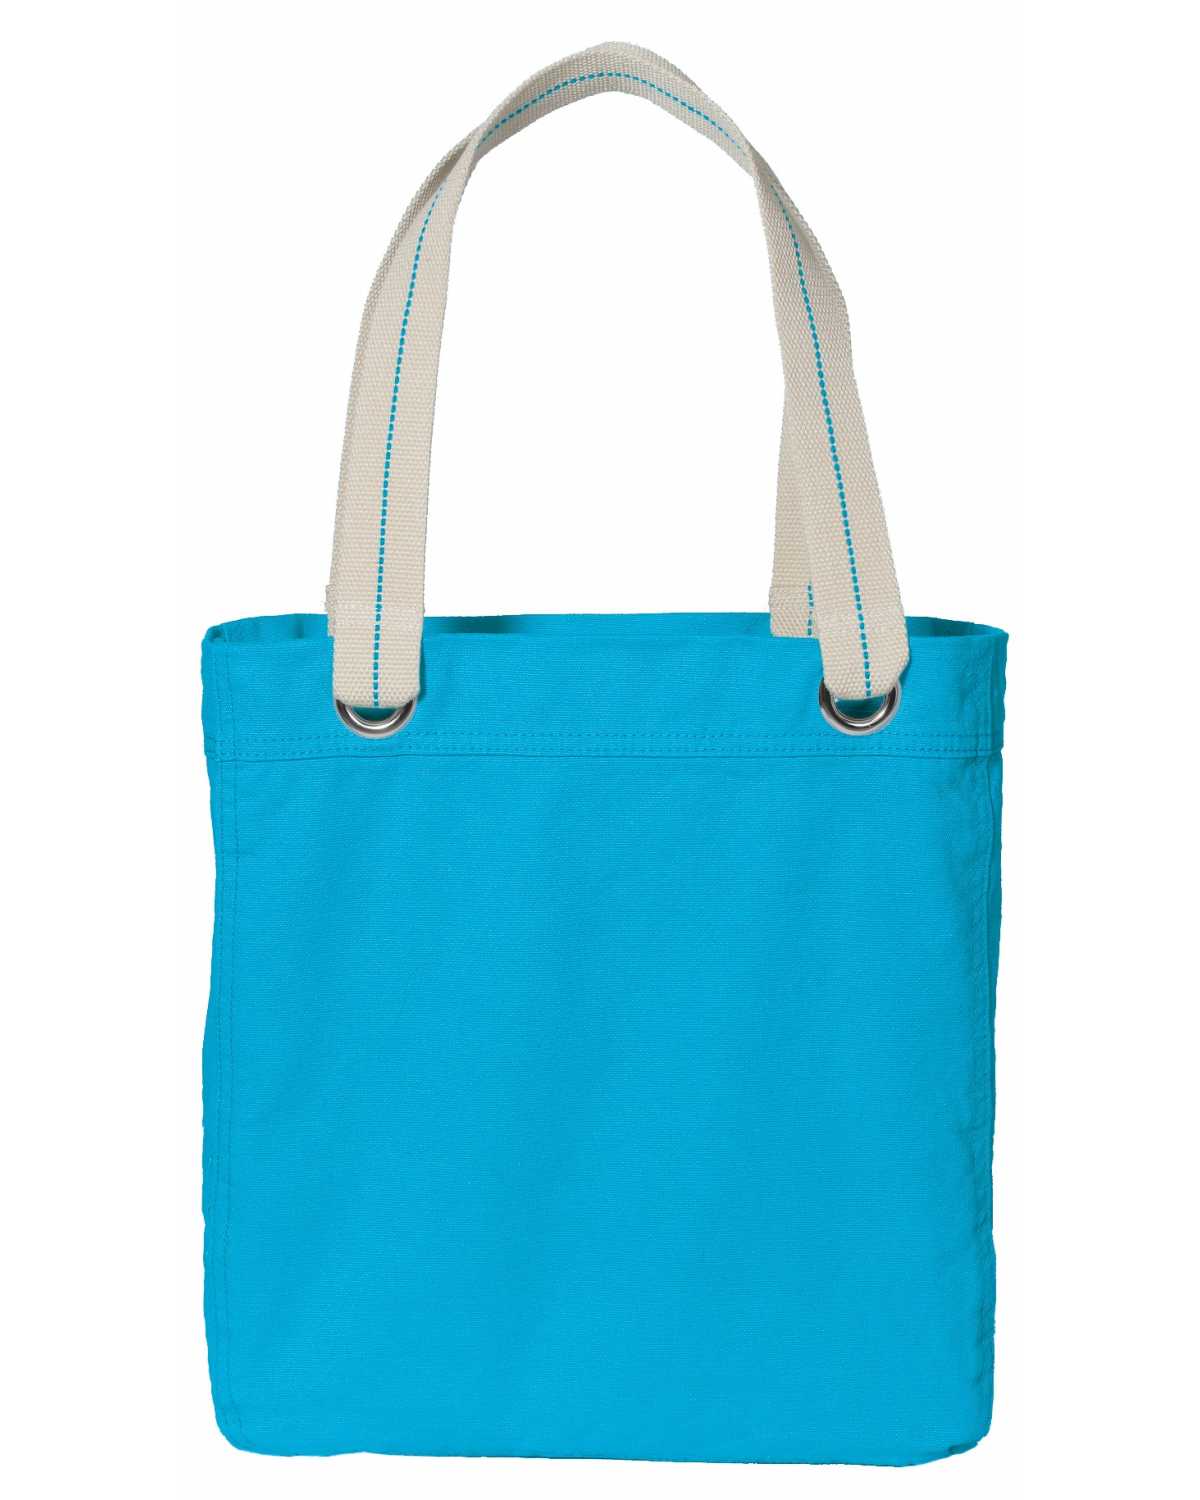 Port Authority B118 Allie Tote on discount | ApparelChoice.com